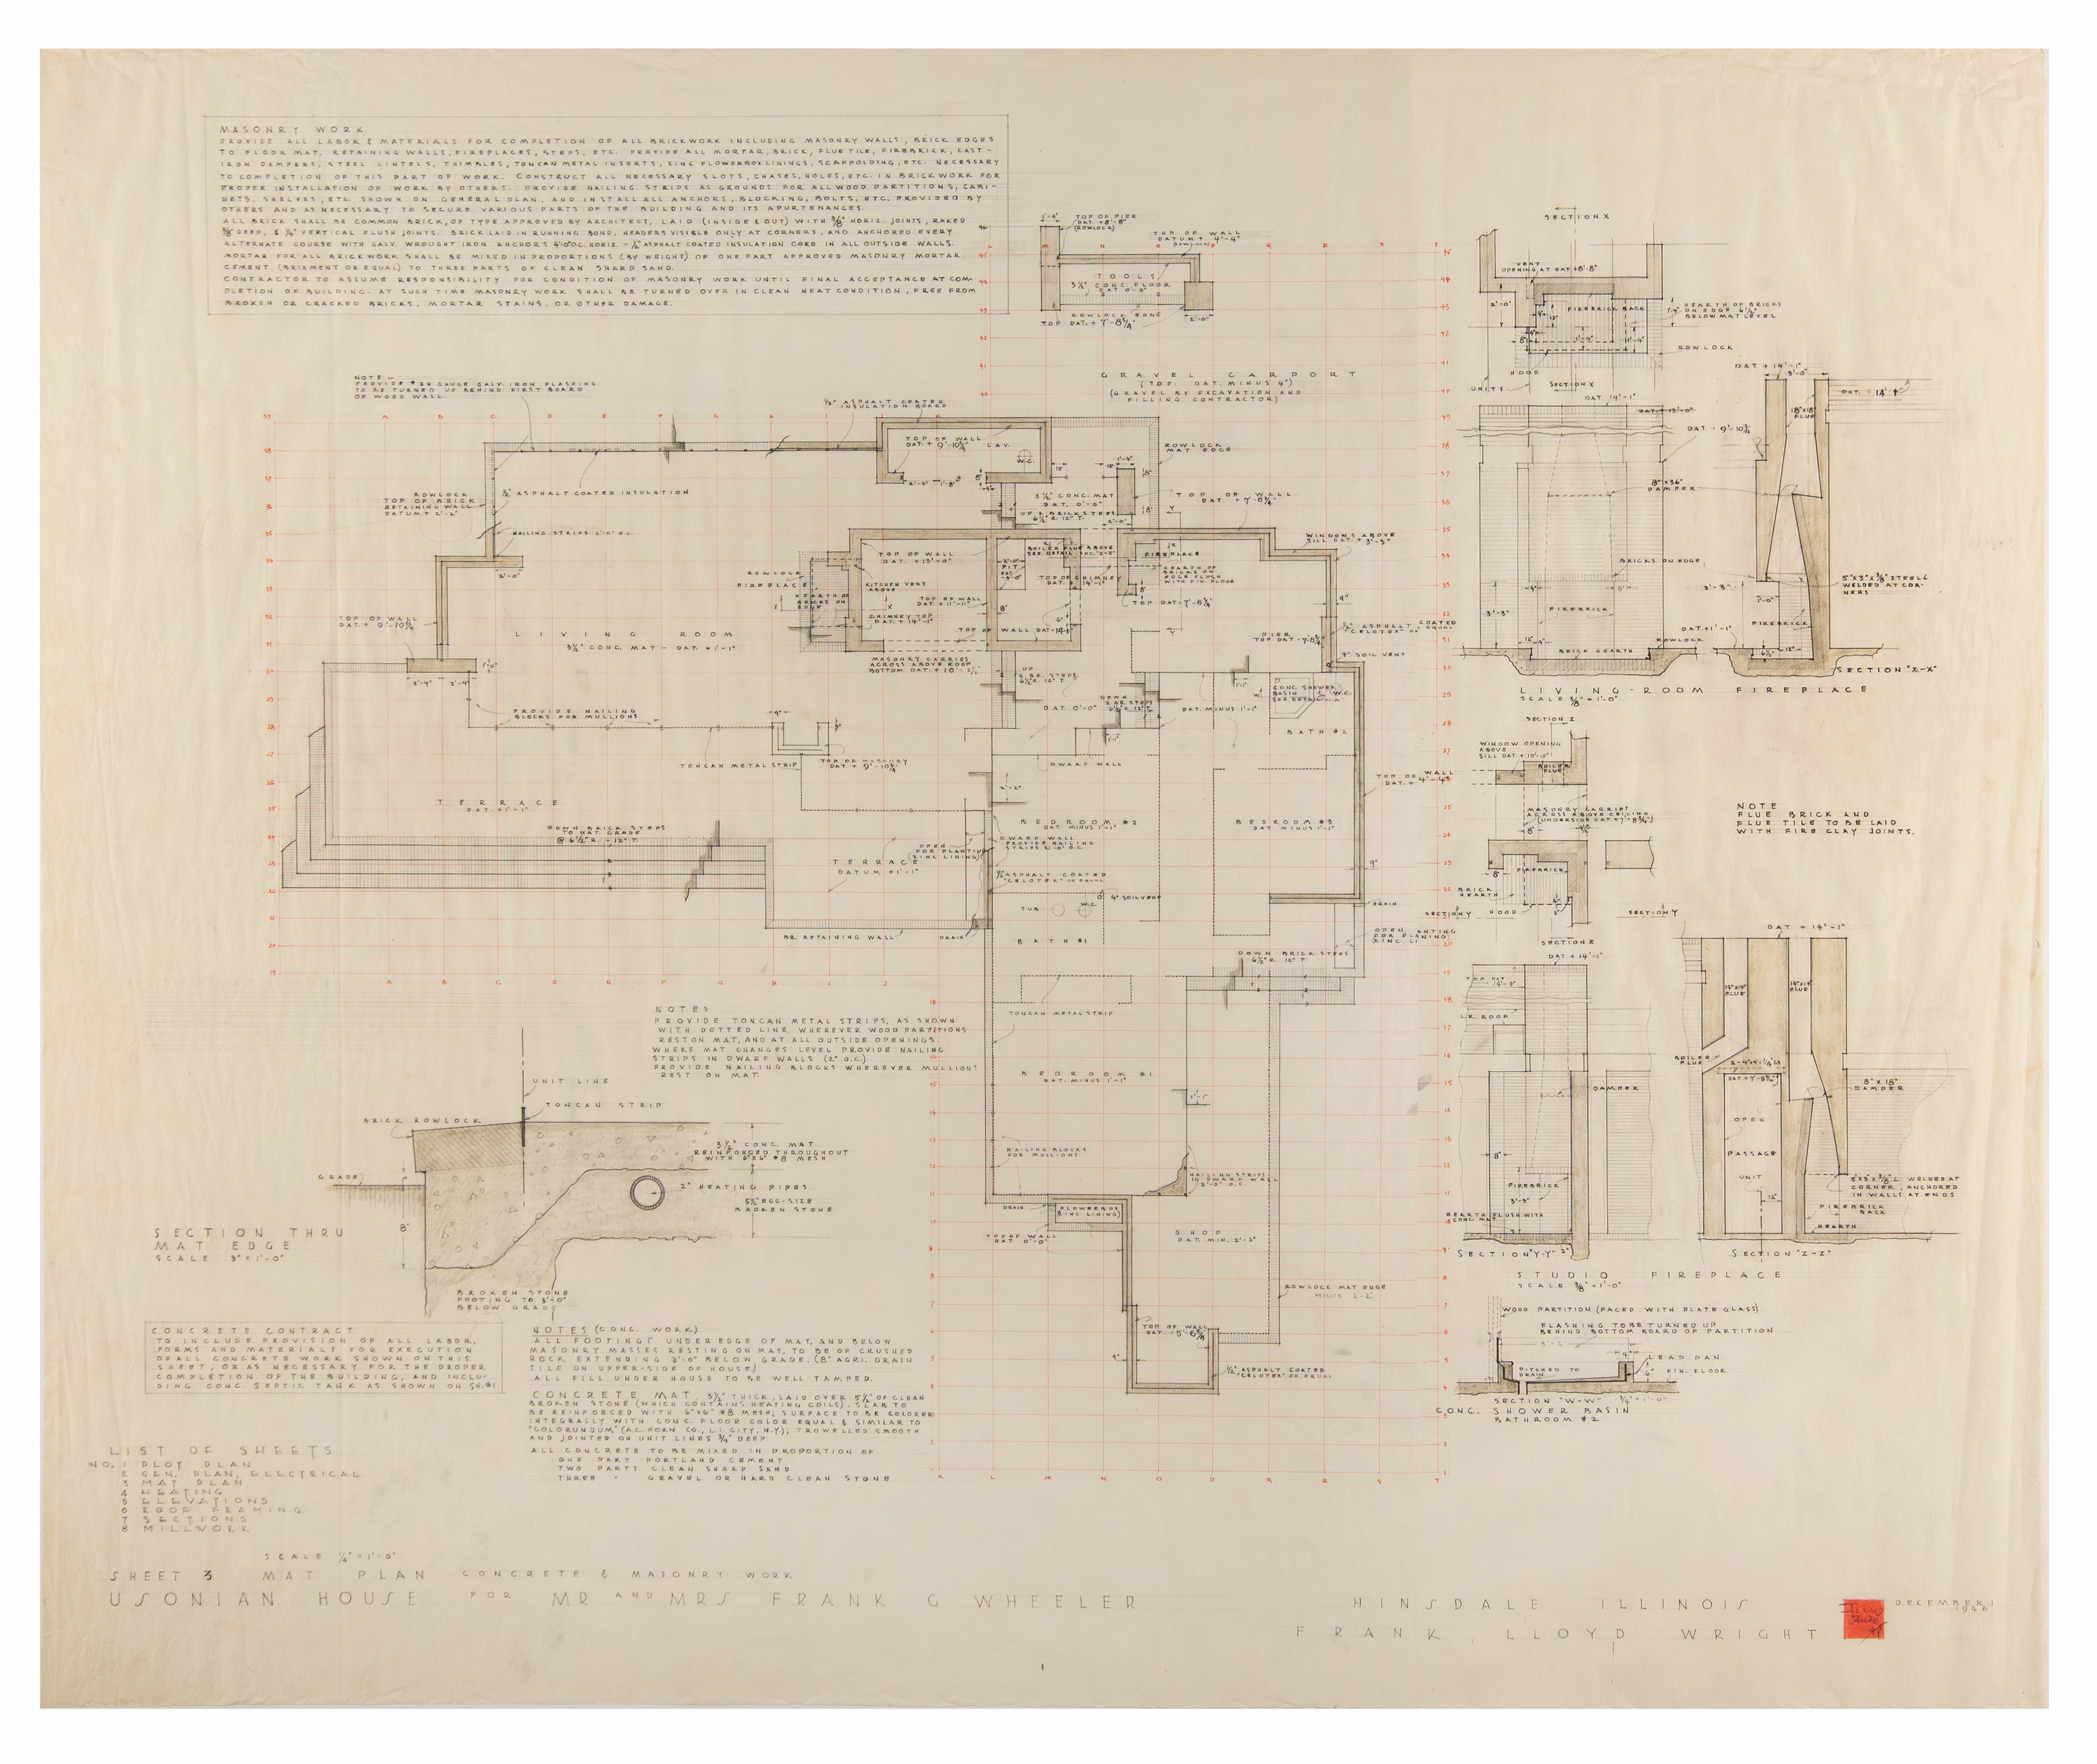 Lot #584 Frank Lloyd Wright Signed Plan for a Usonian House - Image 1